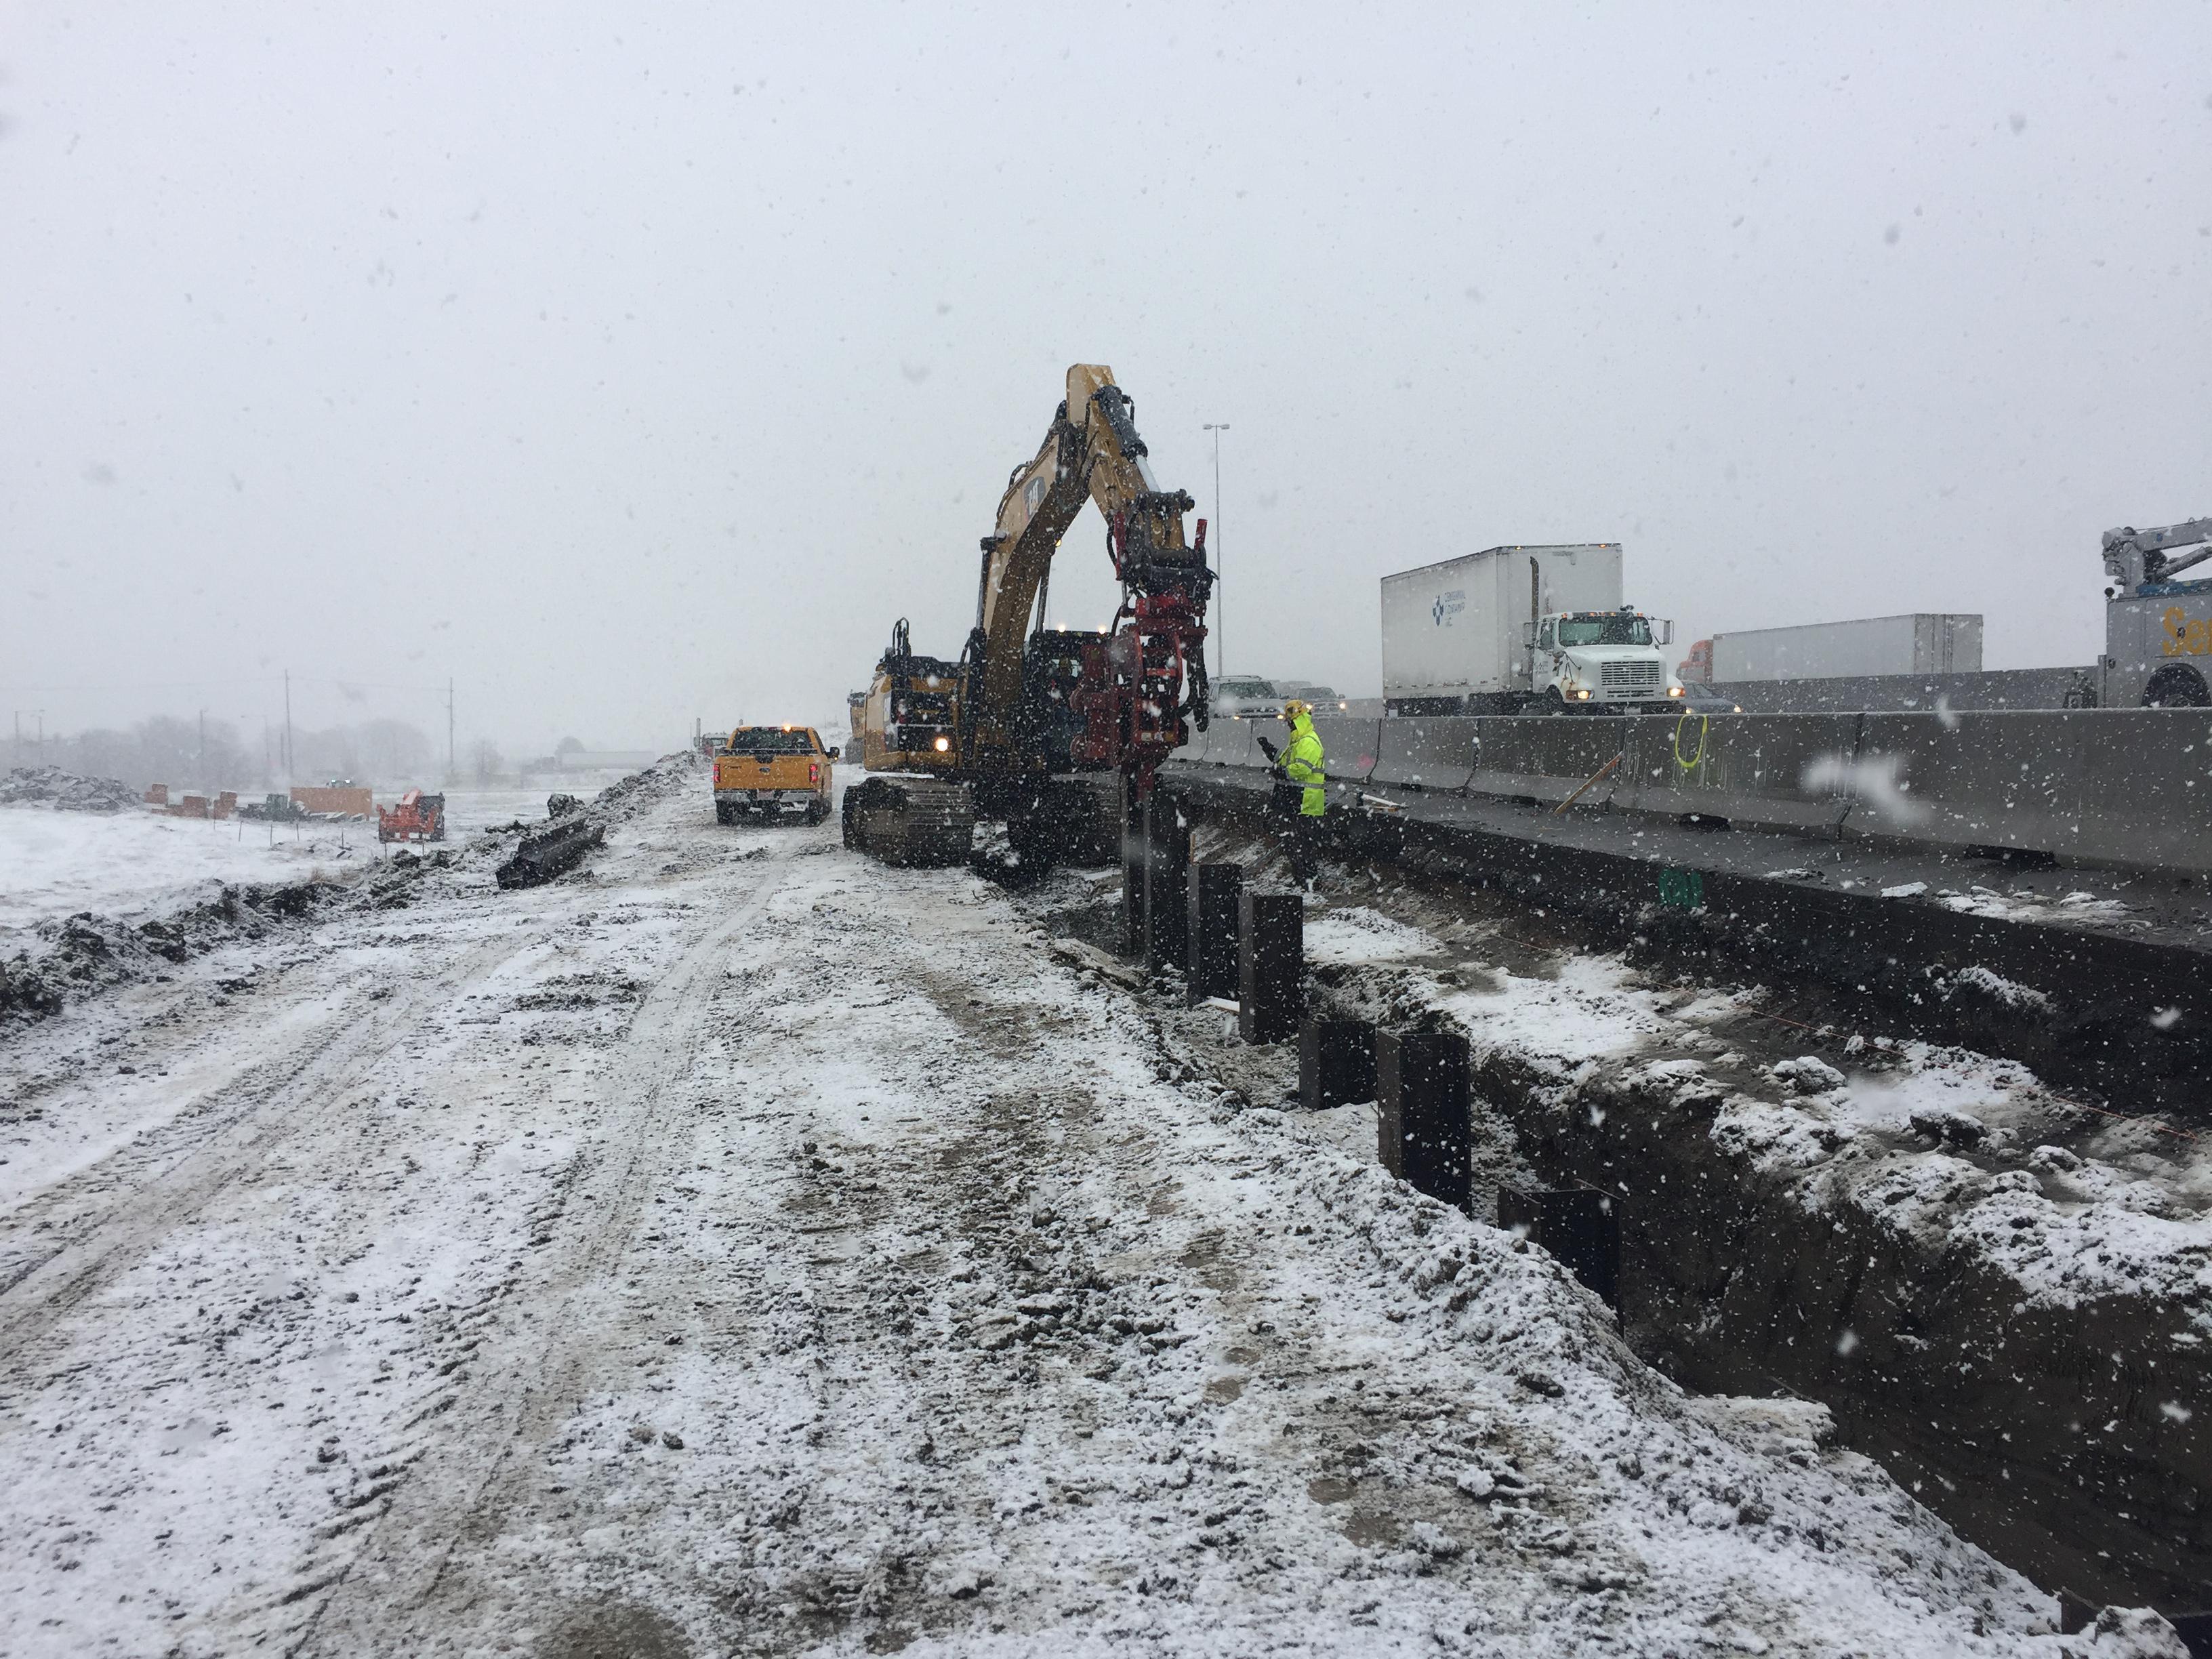 Crews working in snow conditions  detail image